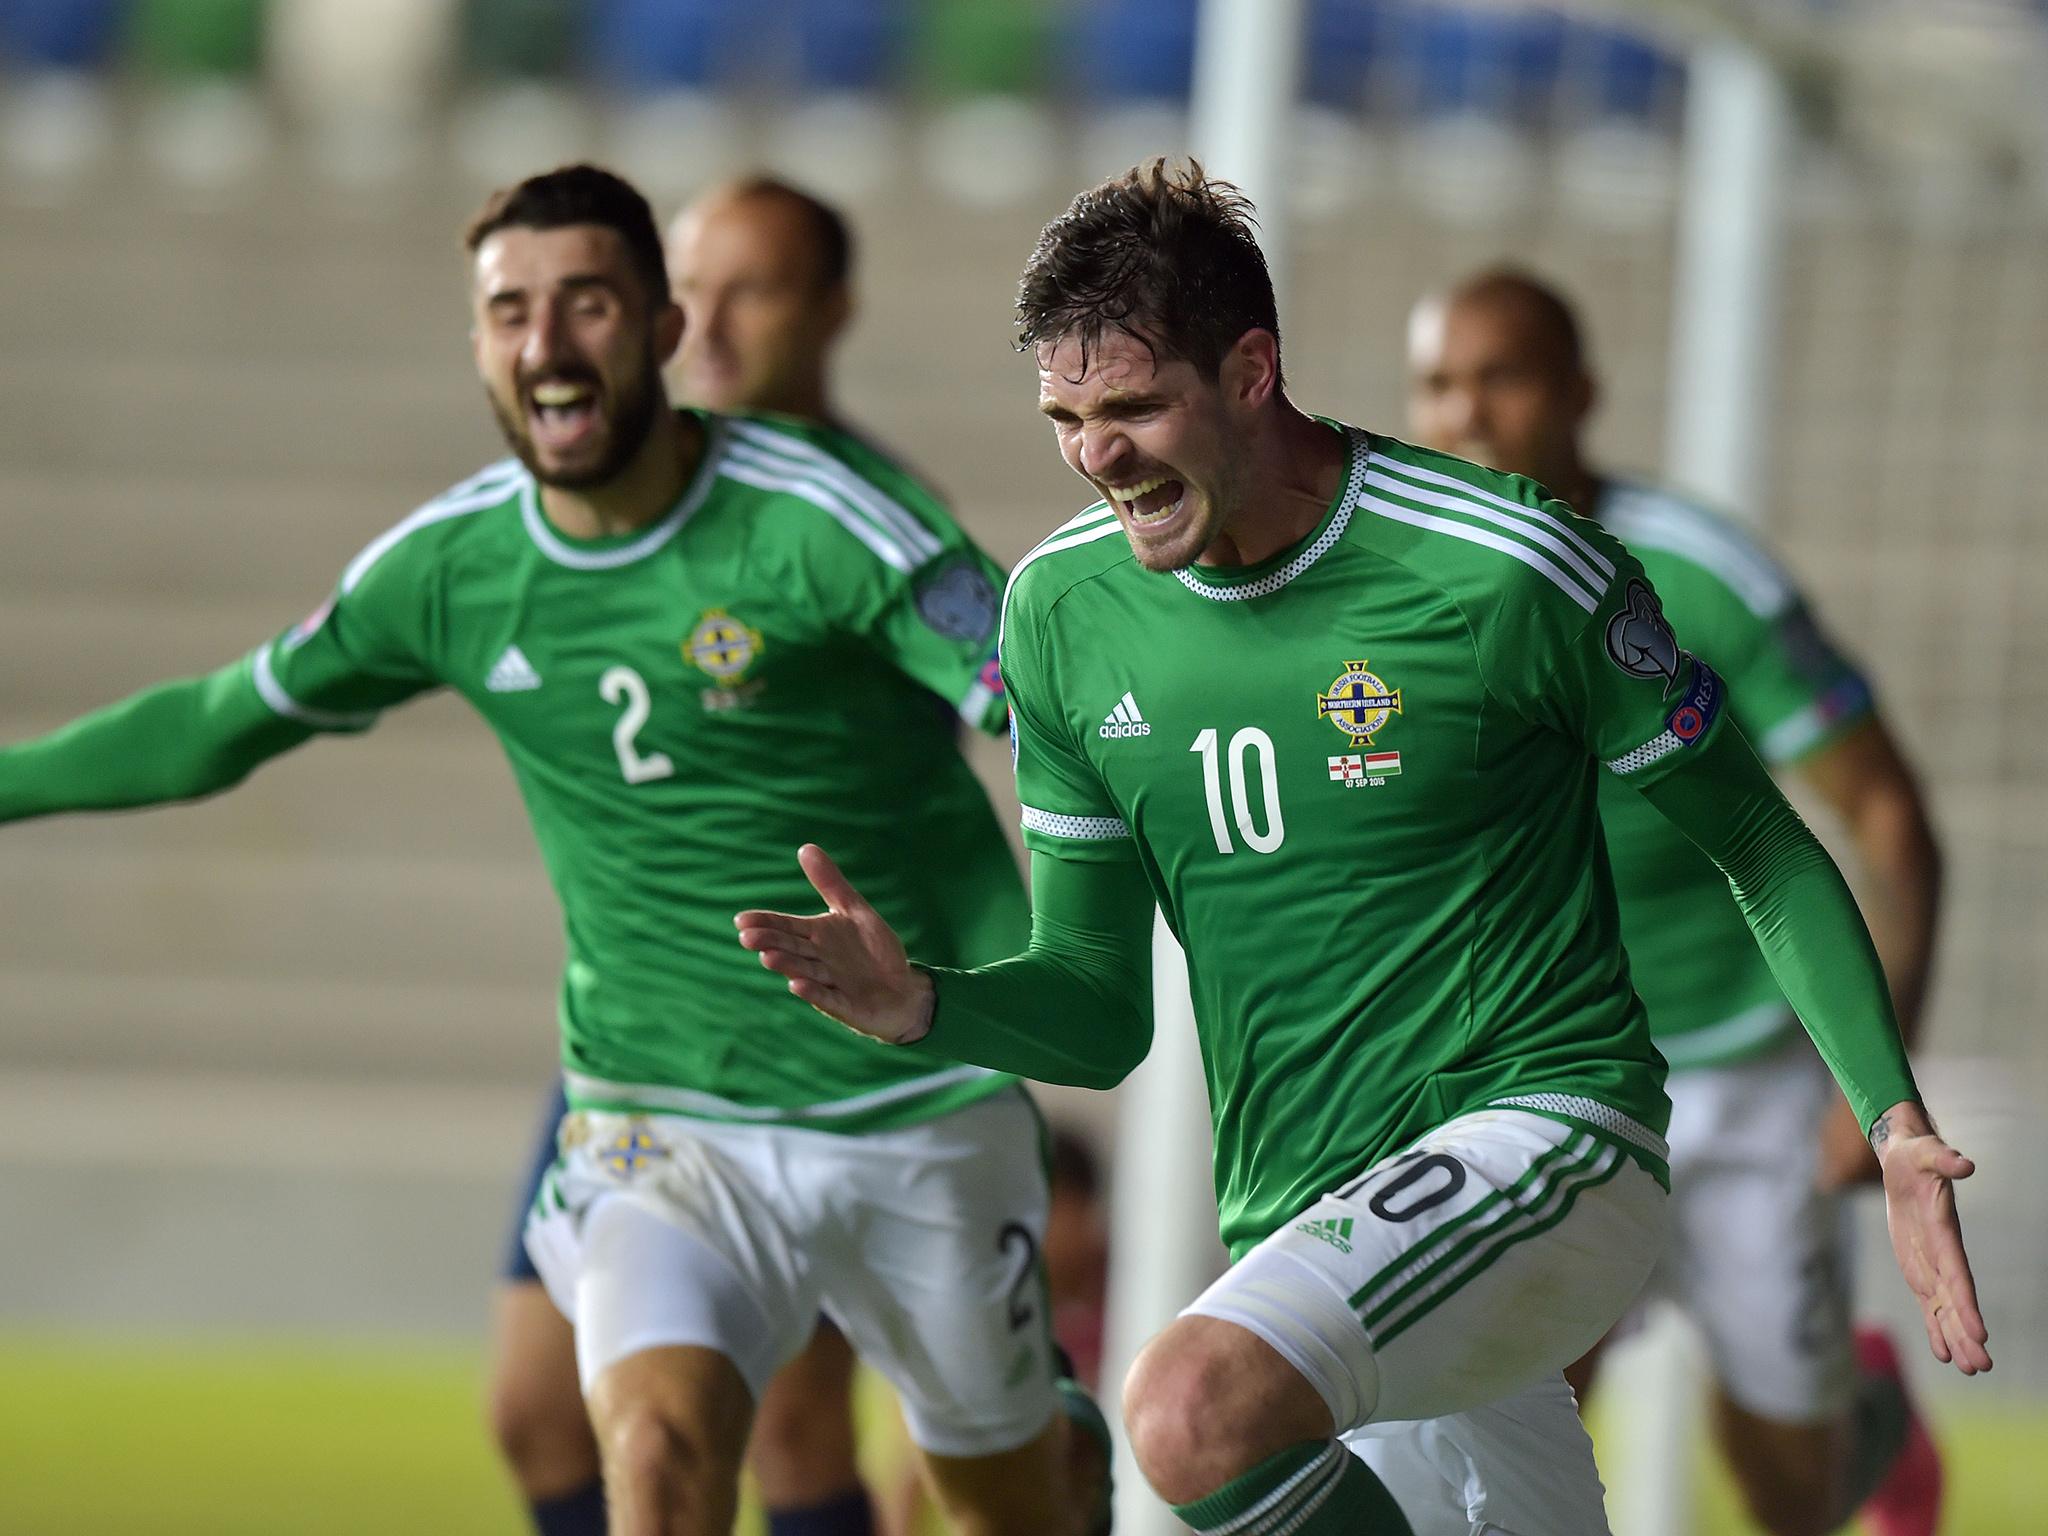 Lafferty scored seven goals for his country during qualifying